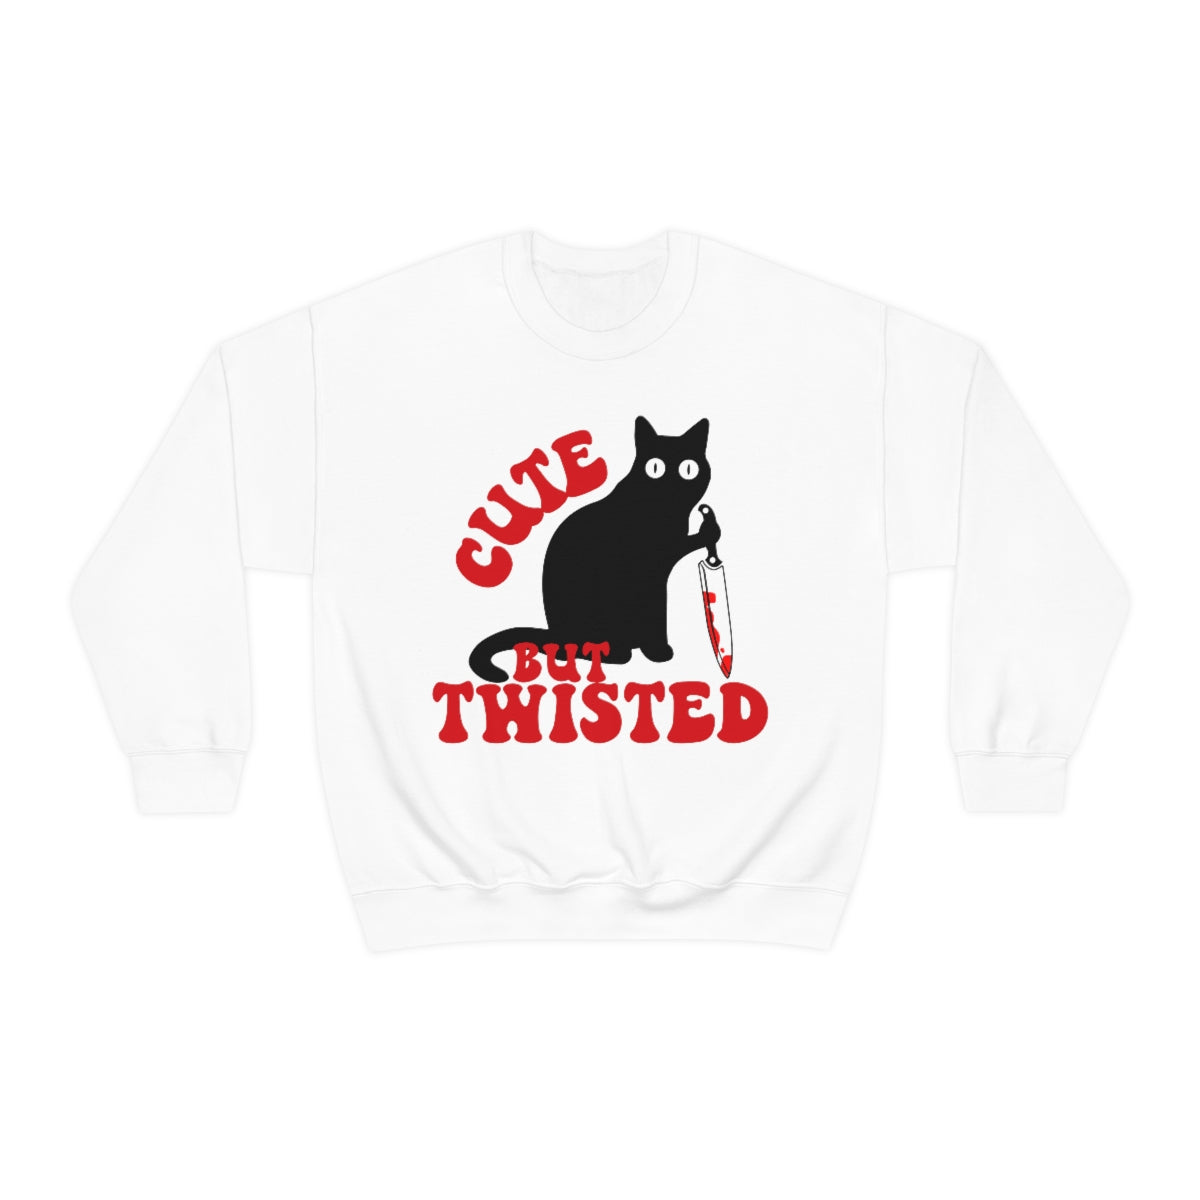 Cute but Twisted True Crime Junkie Cat with Knife Retro Sweatshirt